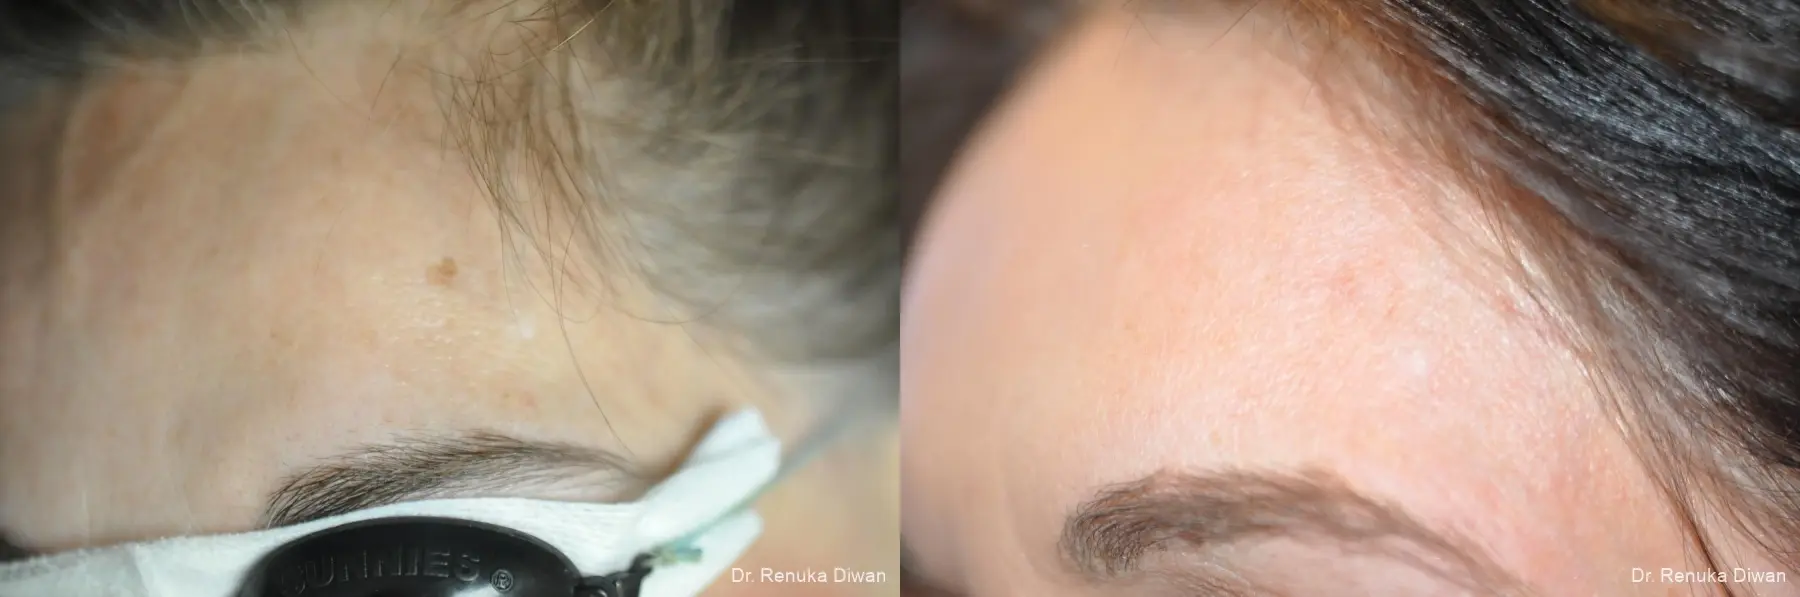 Lasers For Brown Spots: Patient 9 - Before and After 1